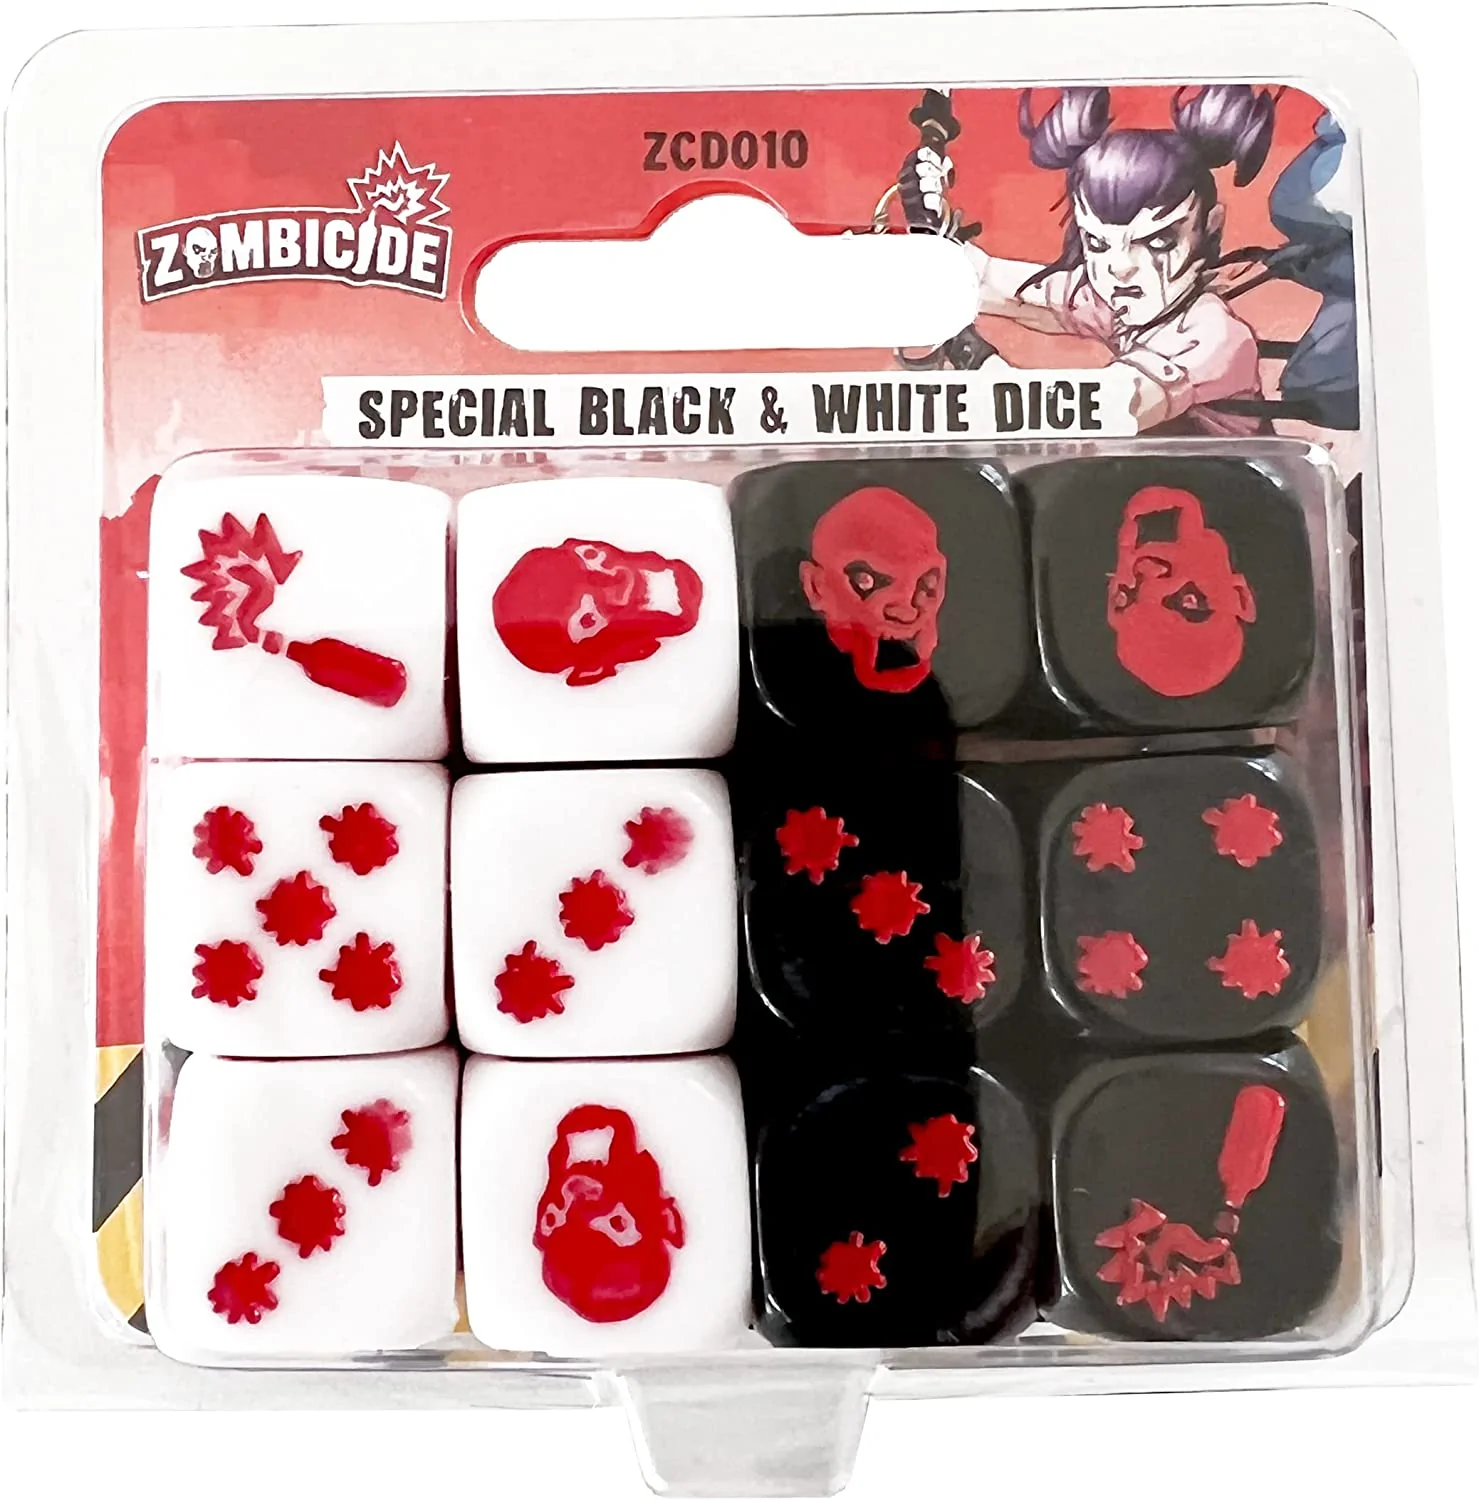 Zombicide 2nd Edition Special Black/White Dice